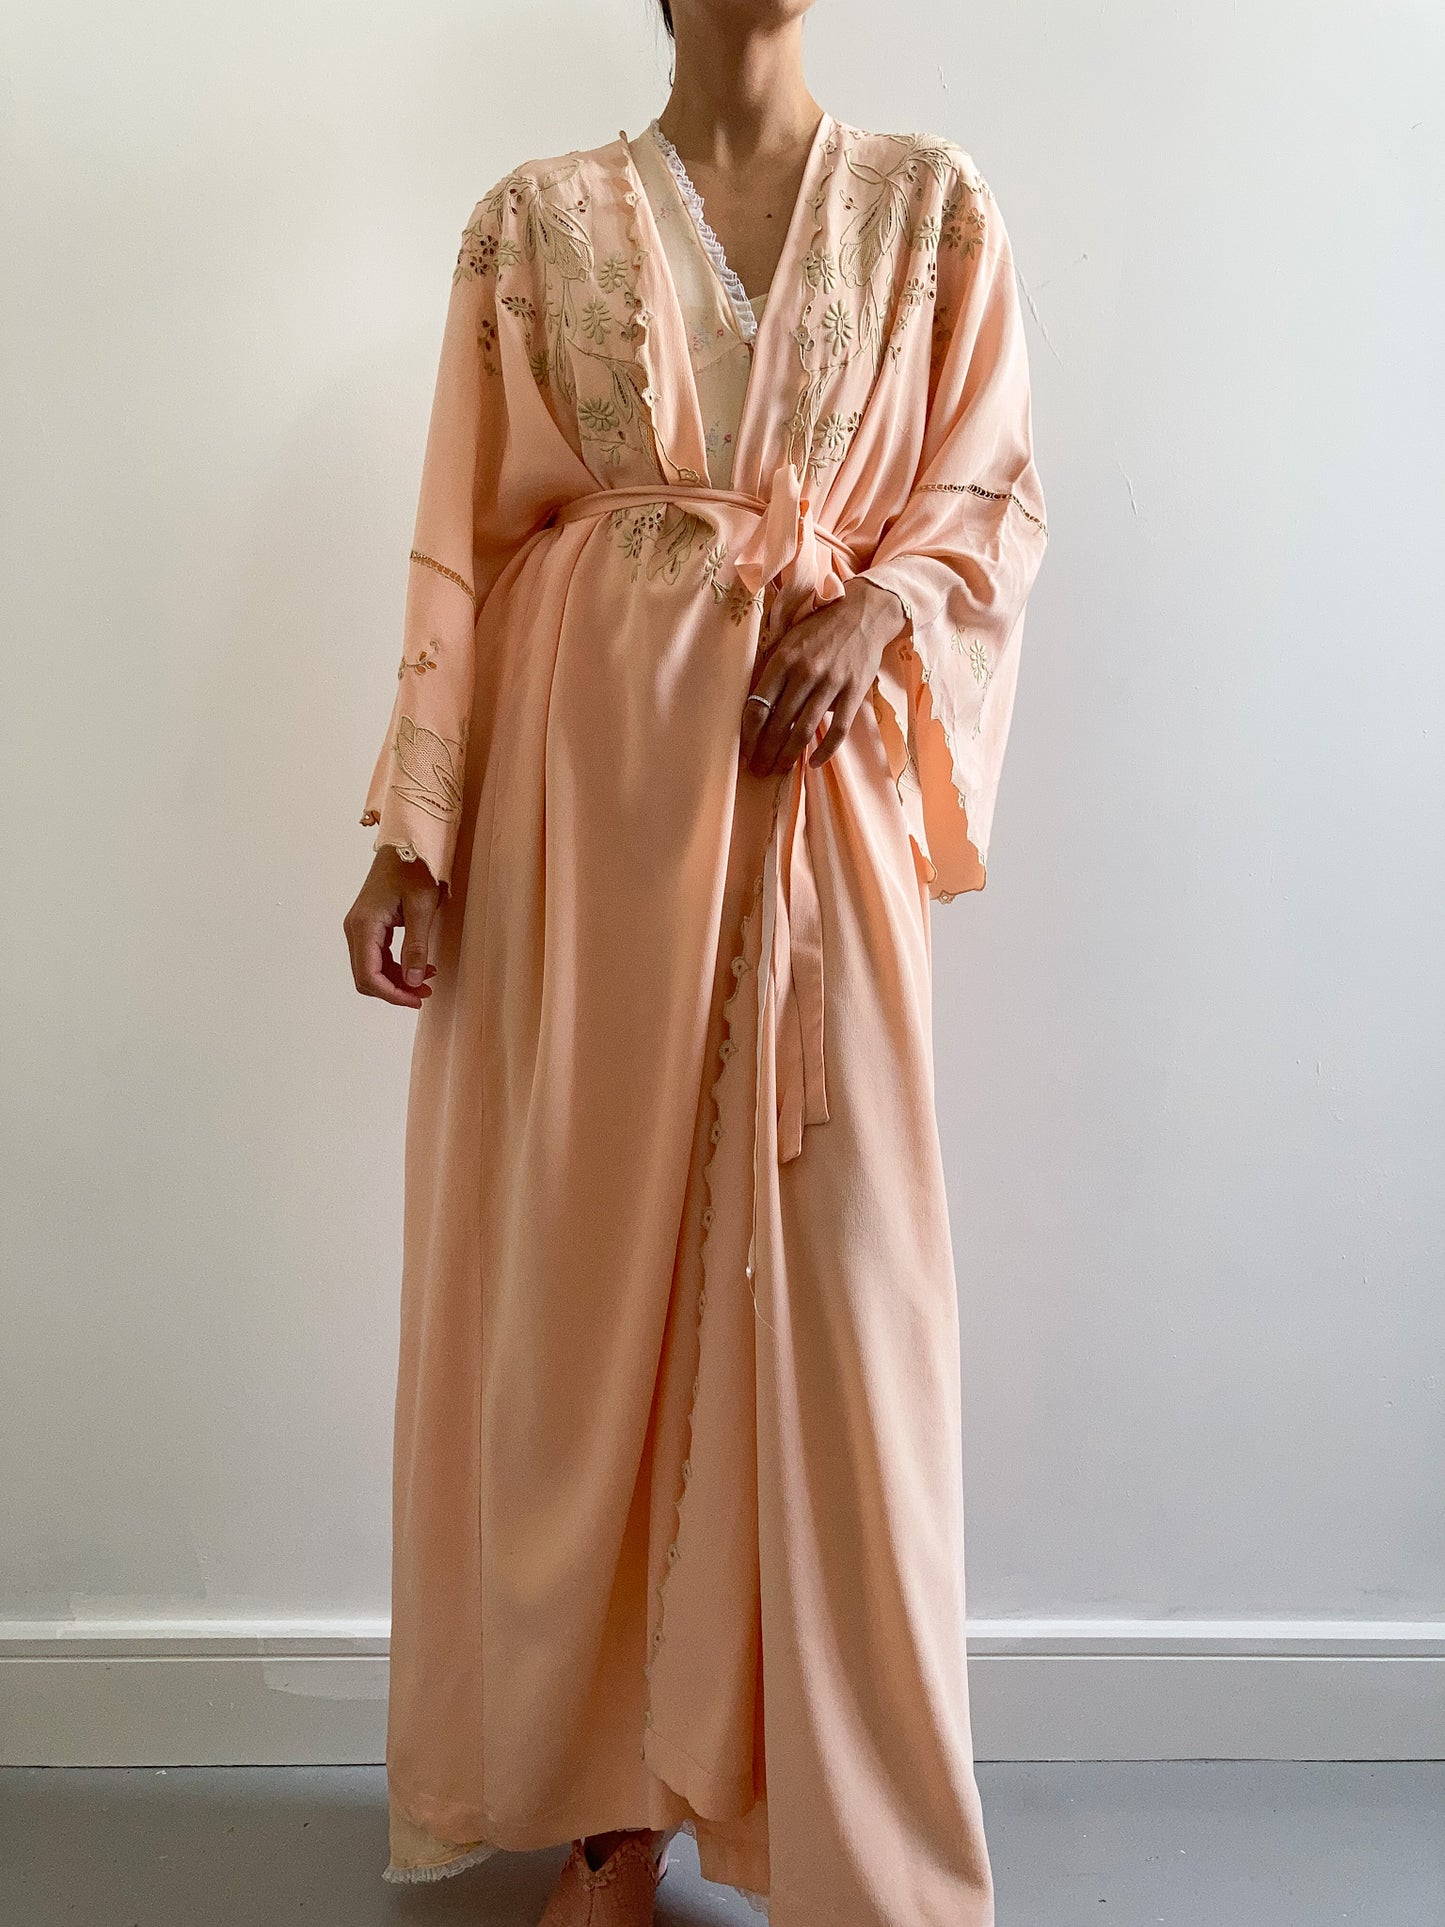 1930s Peach Silk Floral Embroidered Robe